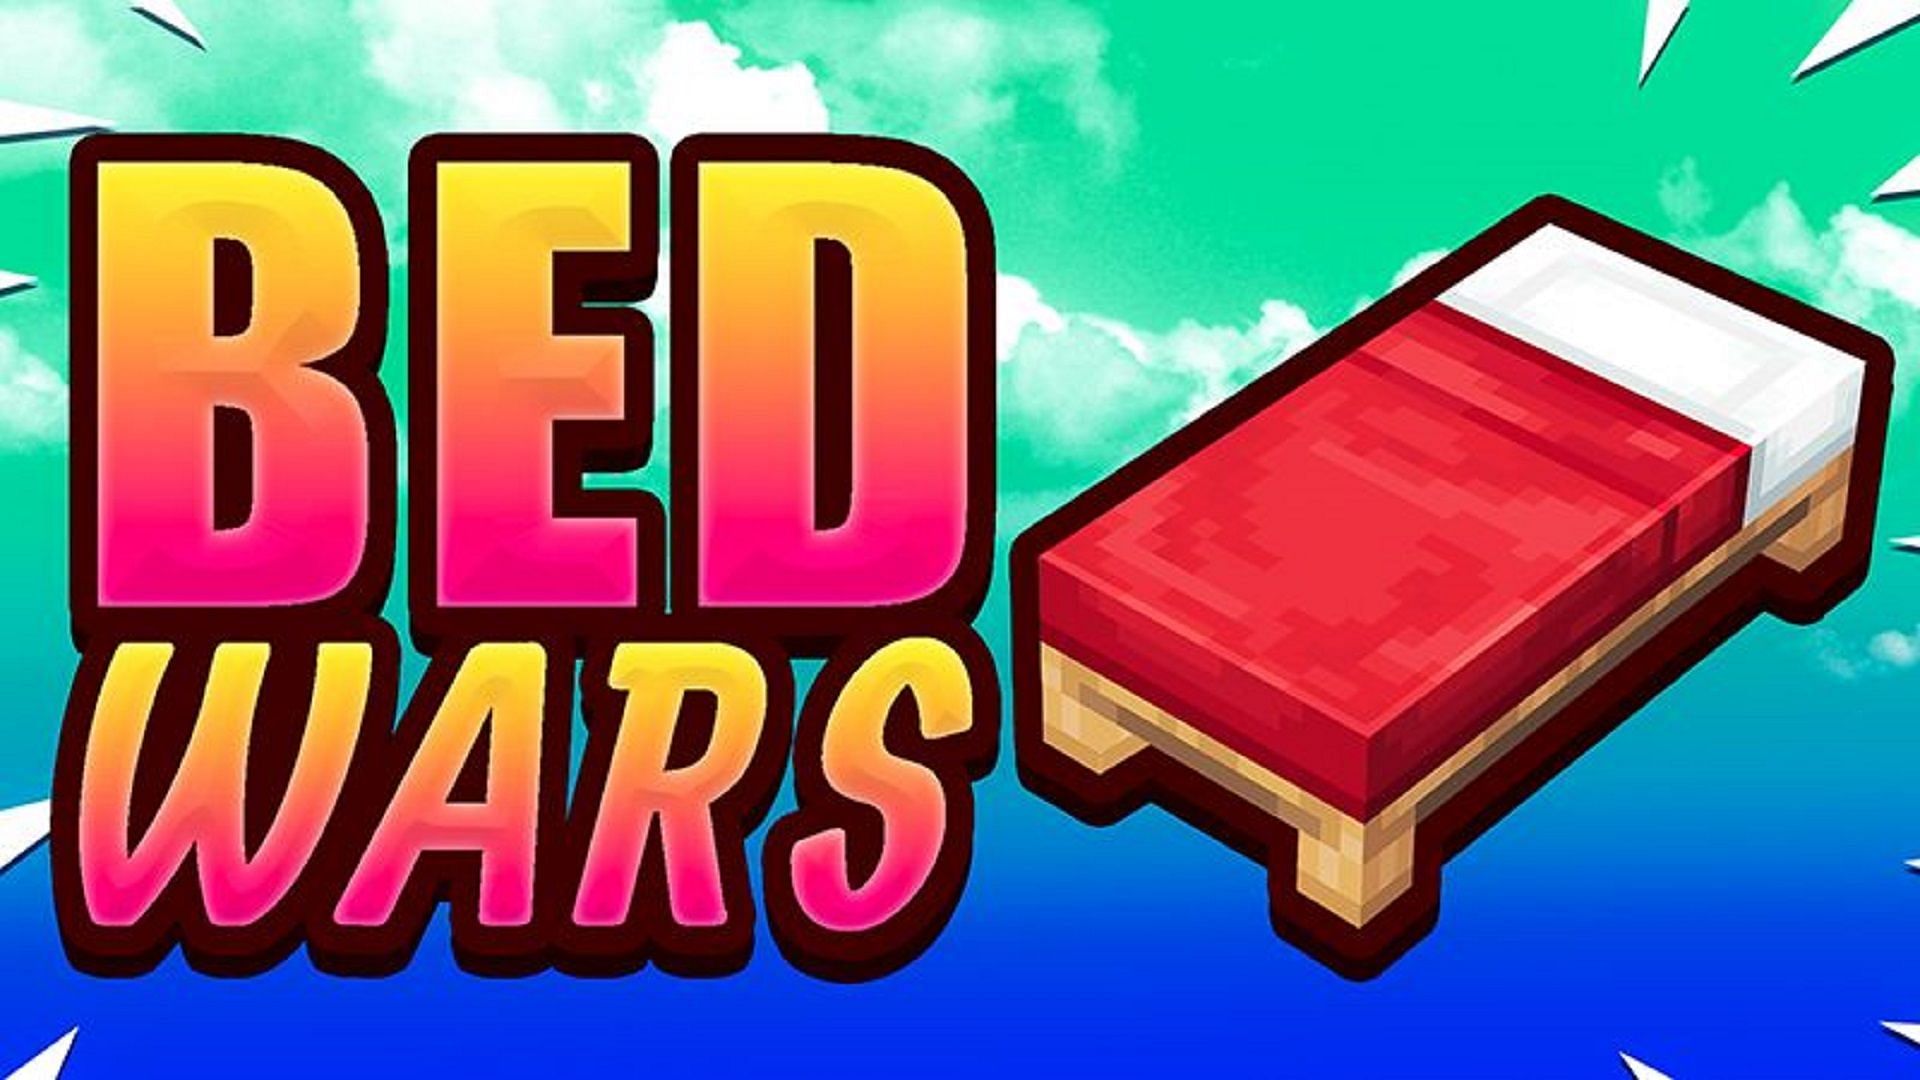 Bedwars is one of the most entertaining PvP game modes in the Minecraft community (Image via 4KS Studios/Minecraft Marketplace)